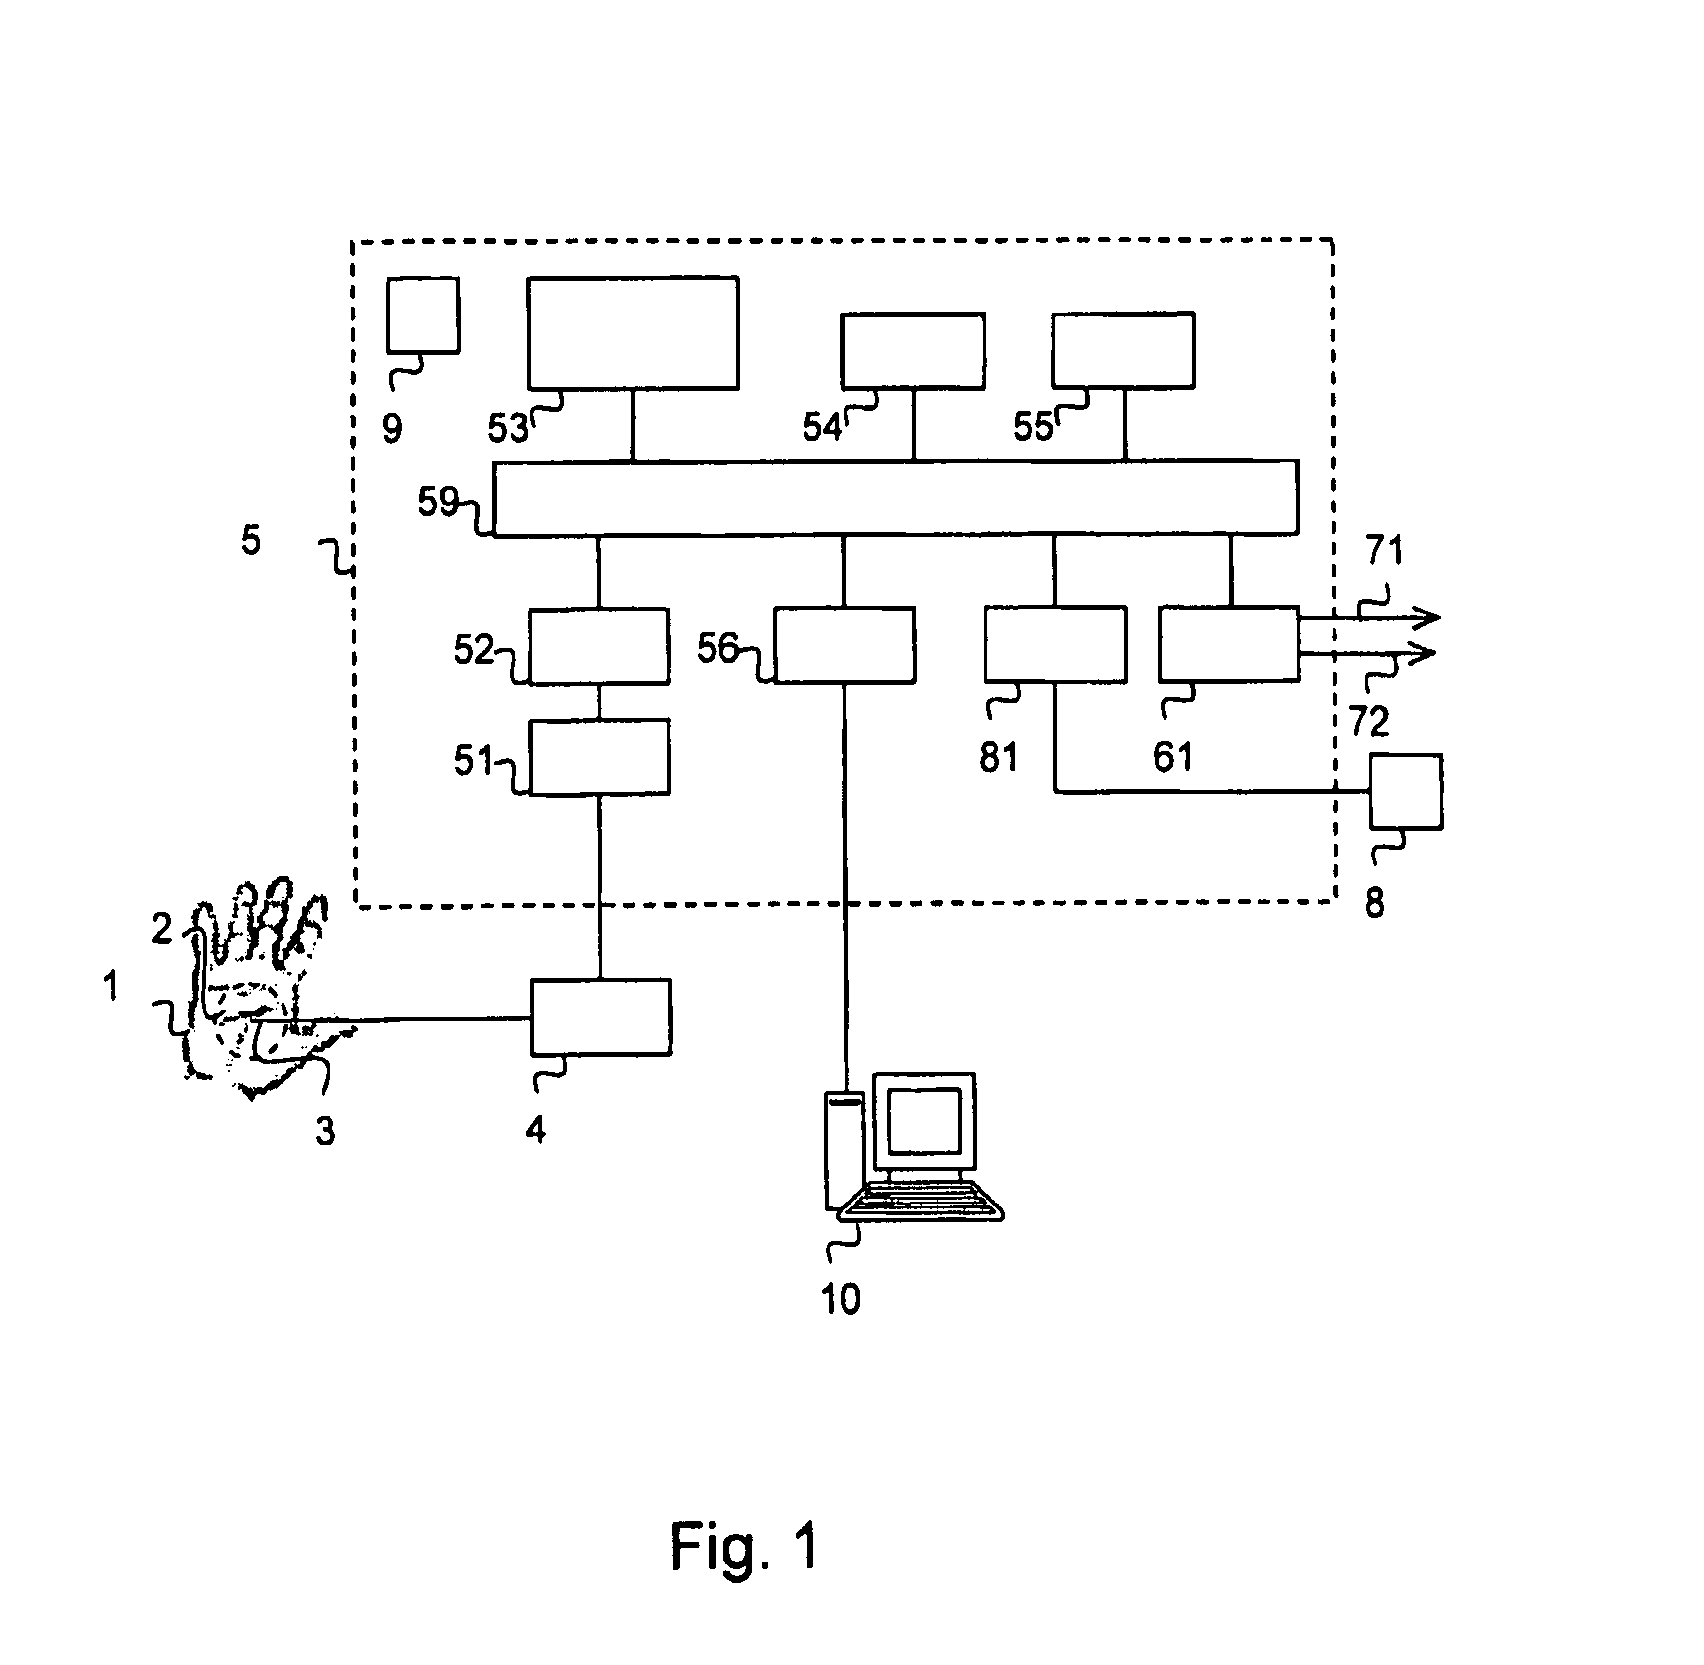 Method and apparatus for monitoring the autonomous nervous system of a sedated patient